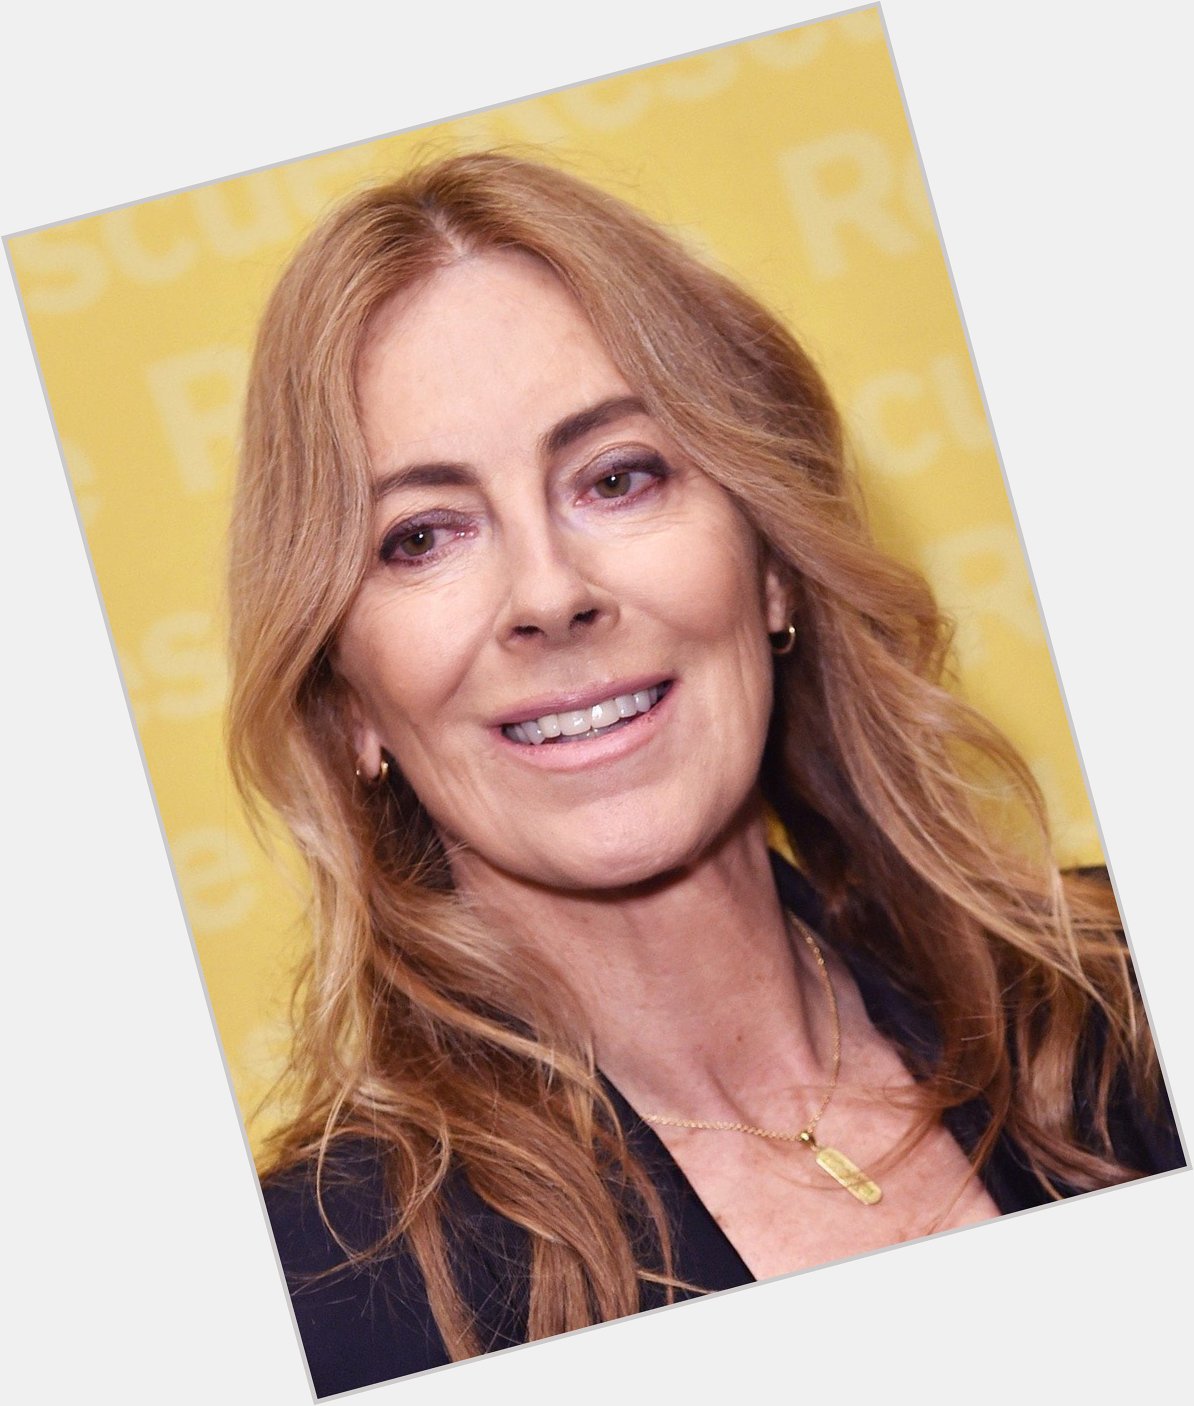 Happy Birthday to director, producer and writer Kathryn Bigelow born on November 27, 1951 